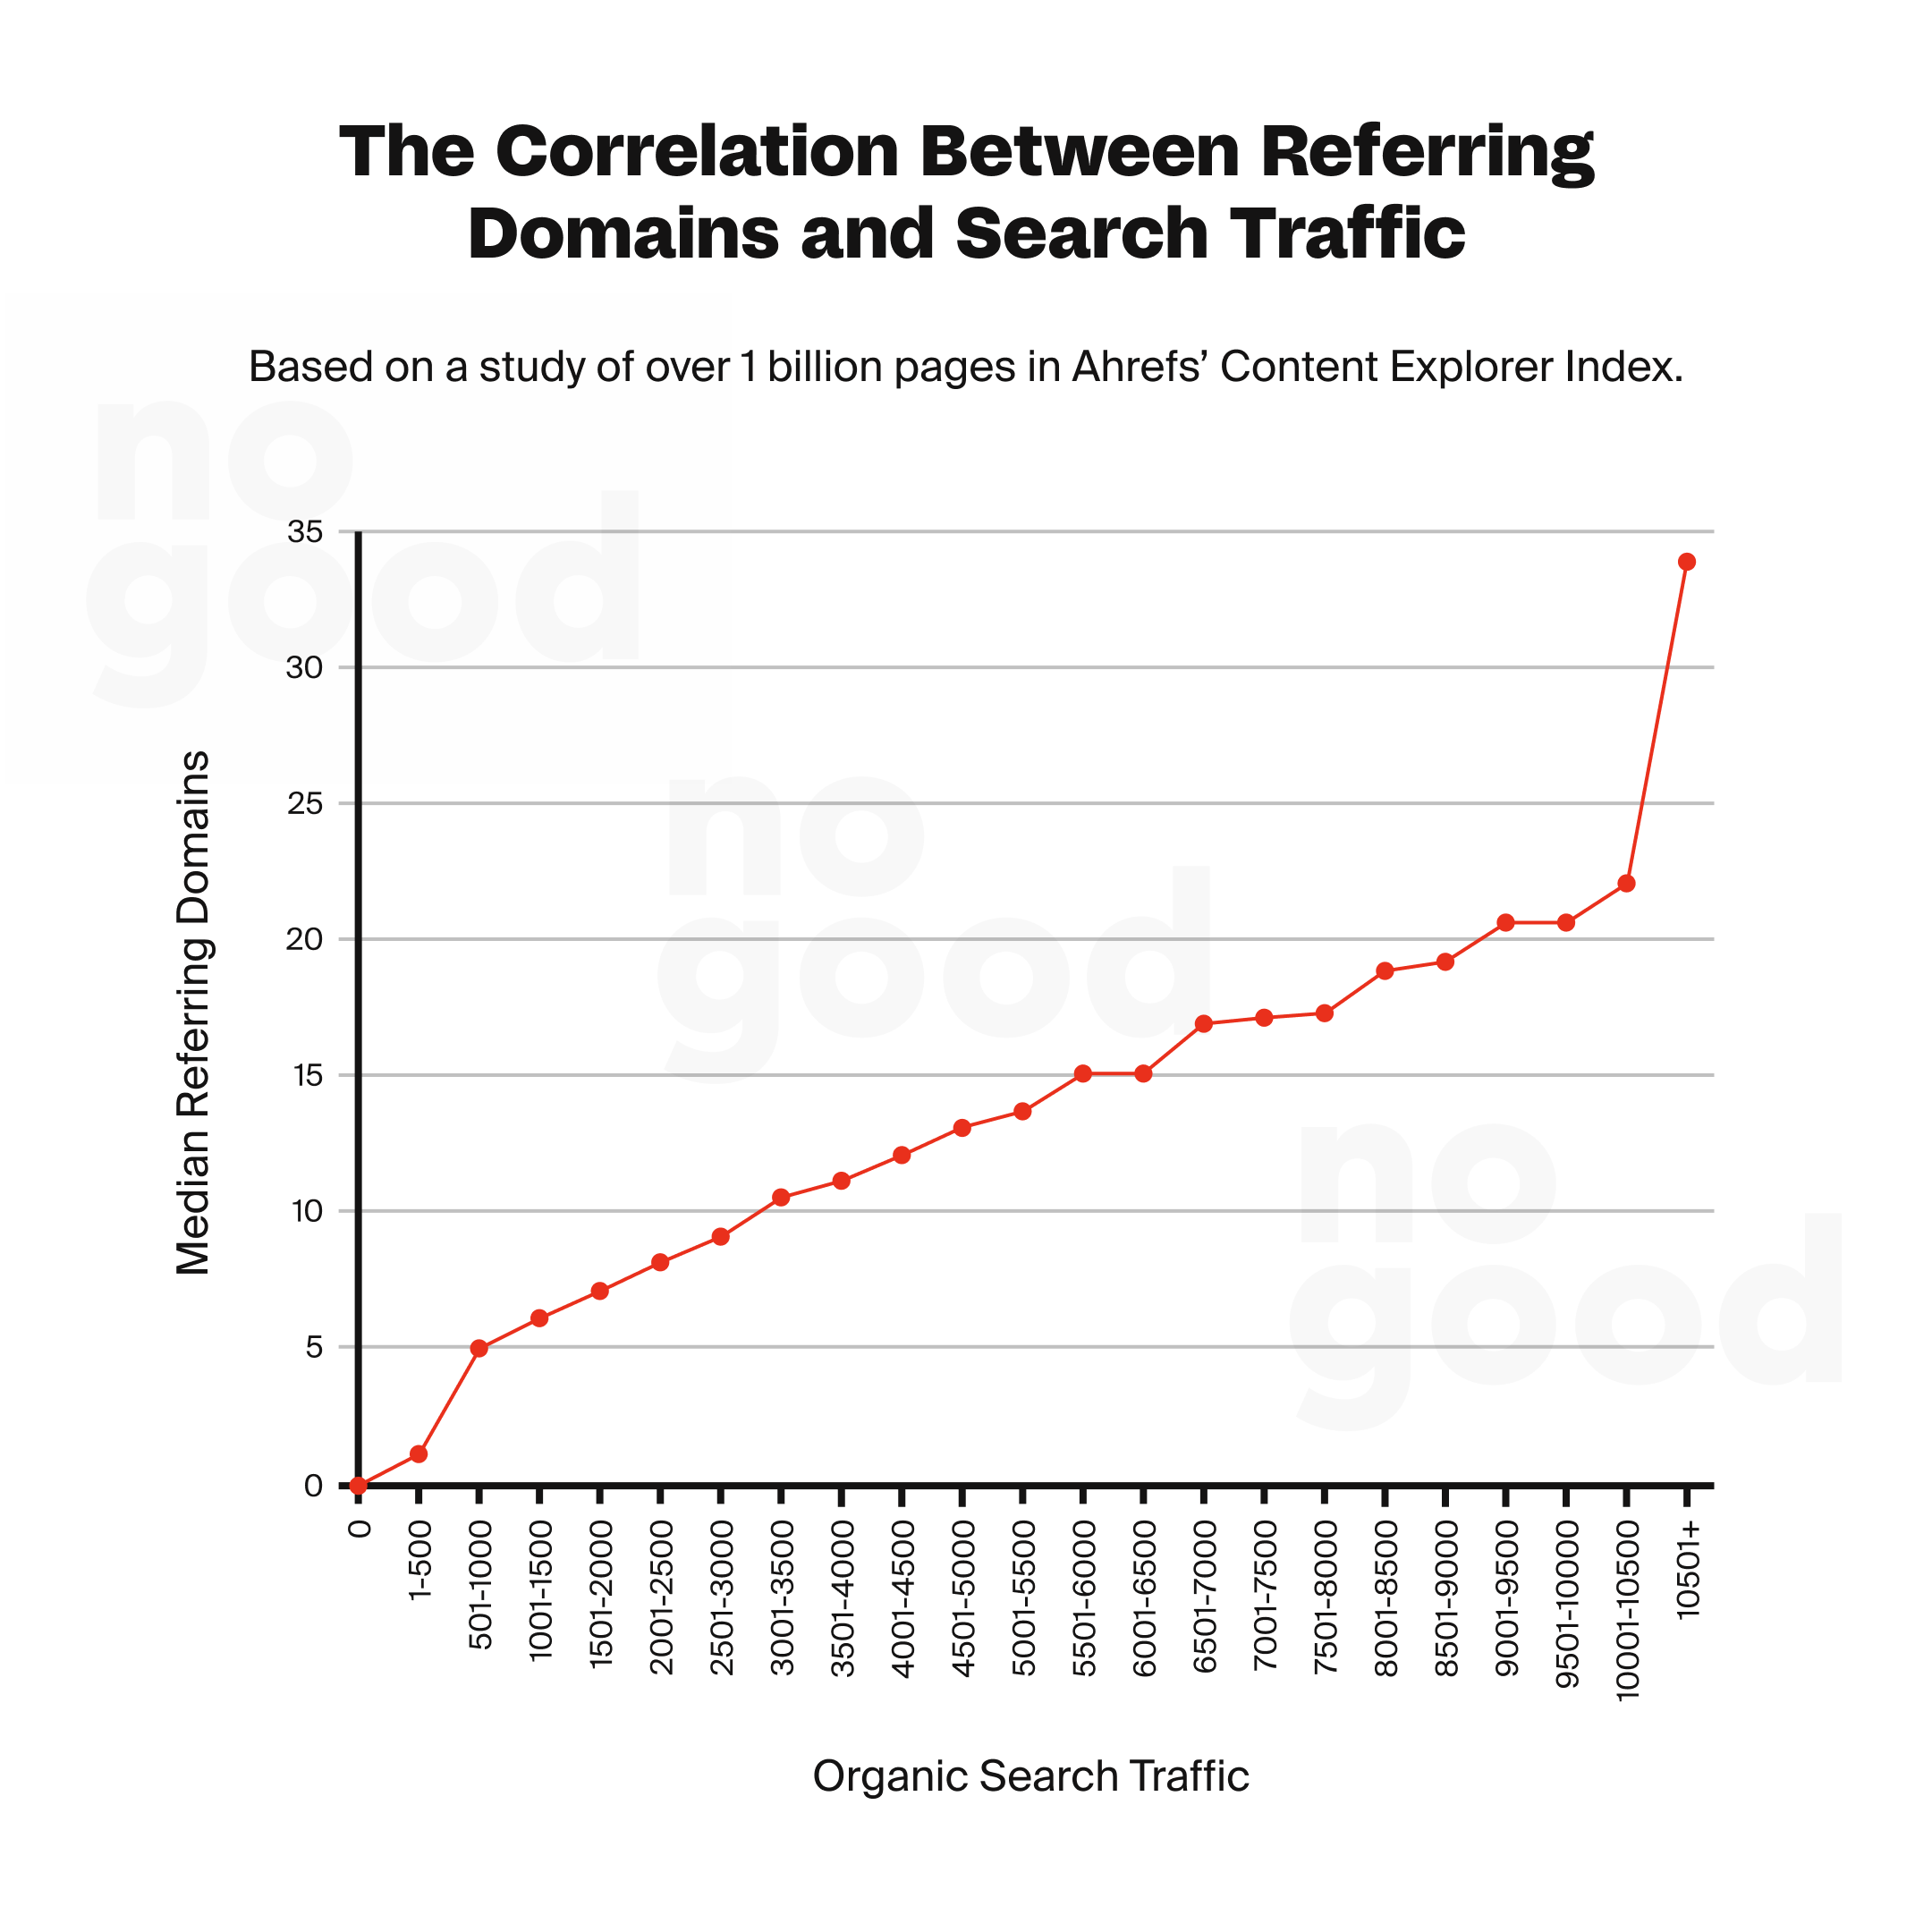 The correlation between referring domains and search traffic